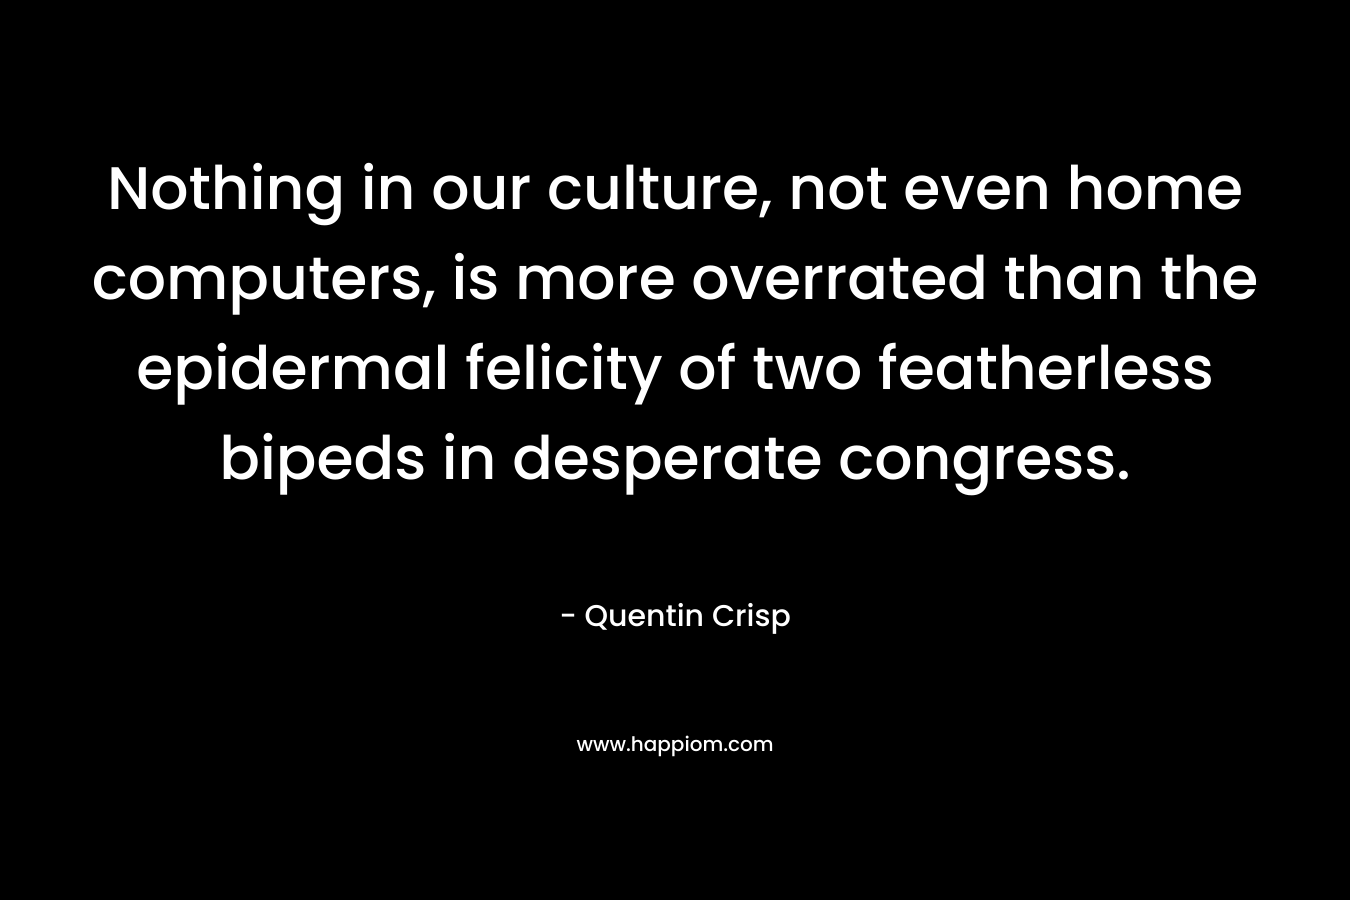 Nothing in our culture, not even home computers, is more overrated than the epidermal felicity of two featherless bipeds in desperate congress. – Quentin Crisp